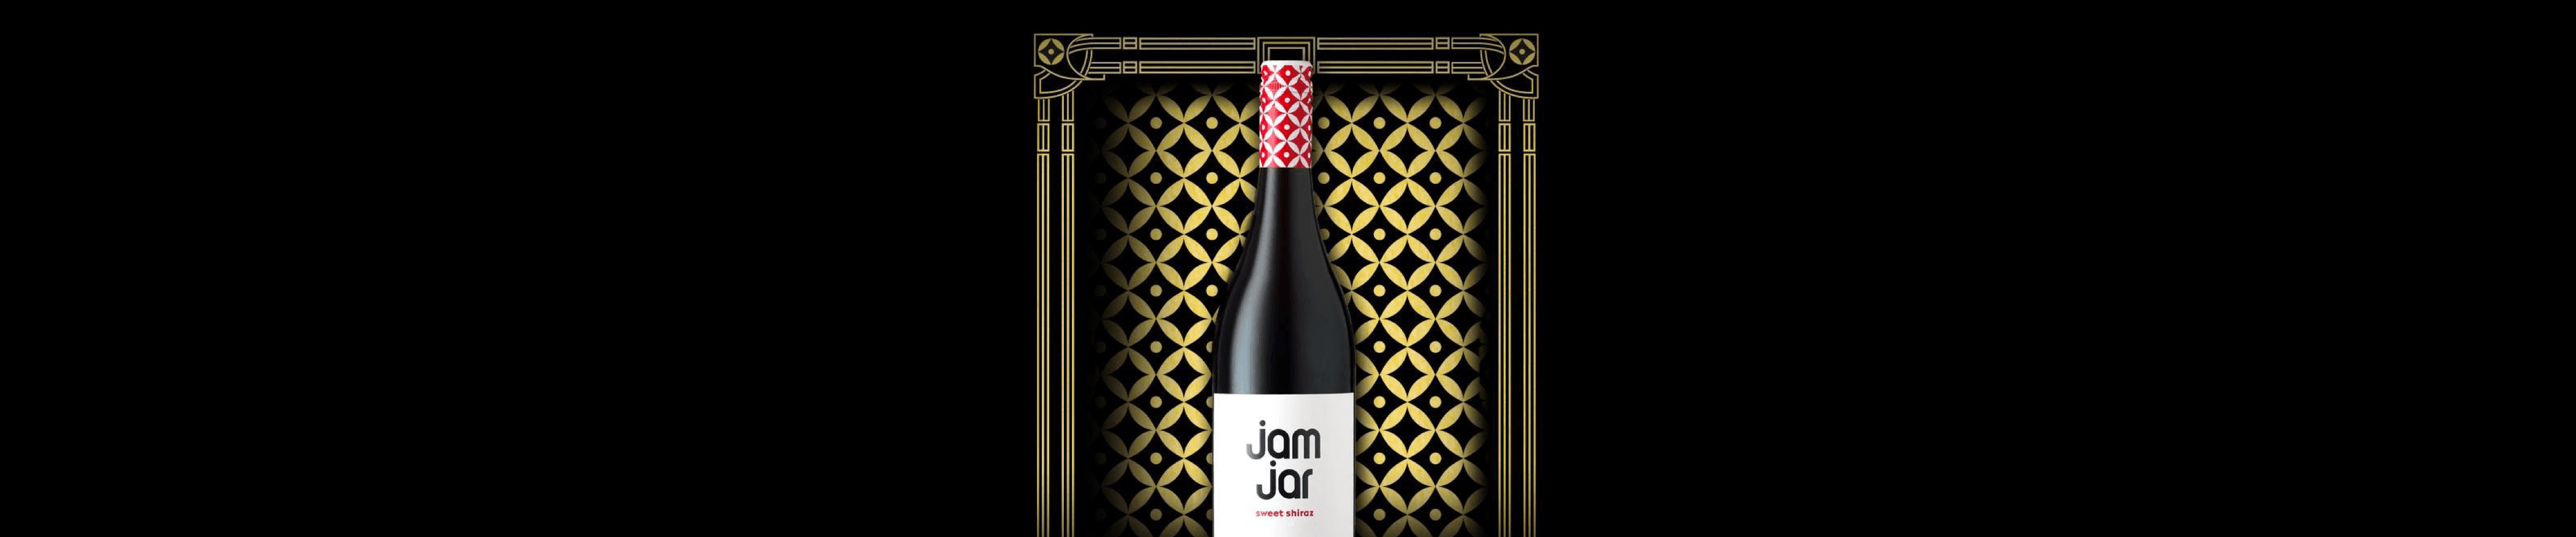 Jam Jar wines are crafted for consumers seeking quality sweet wine – and these fresh, fruity, semi-sweet bottlings deliver. Refreshing and approachable with a perfect balance between sweetness and acidity, Jam Jar Wines are sweet perfection.